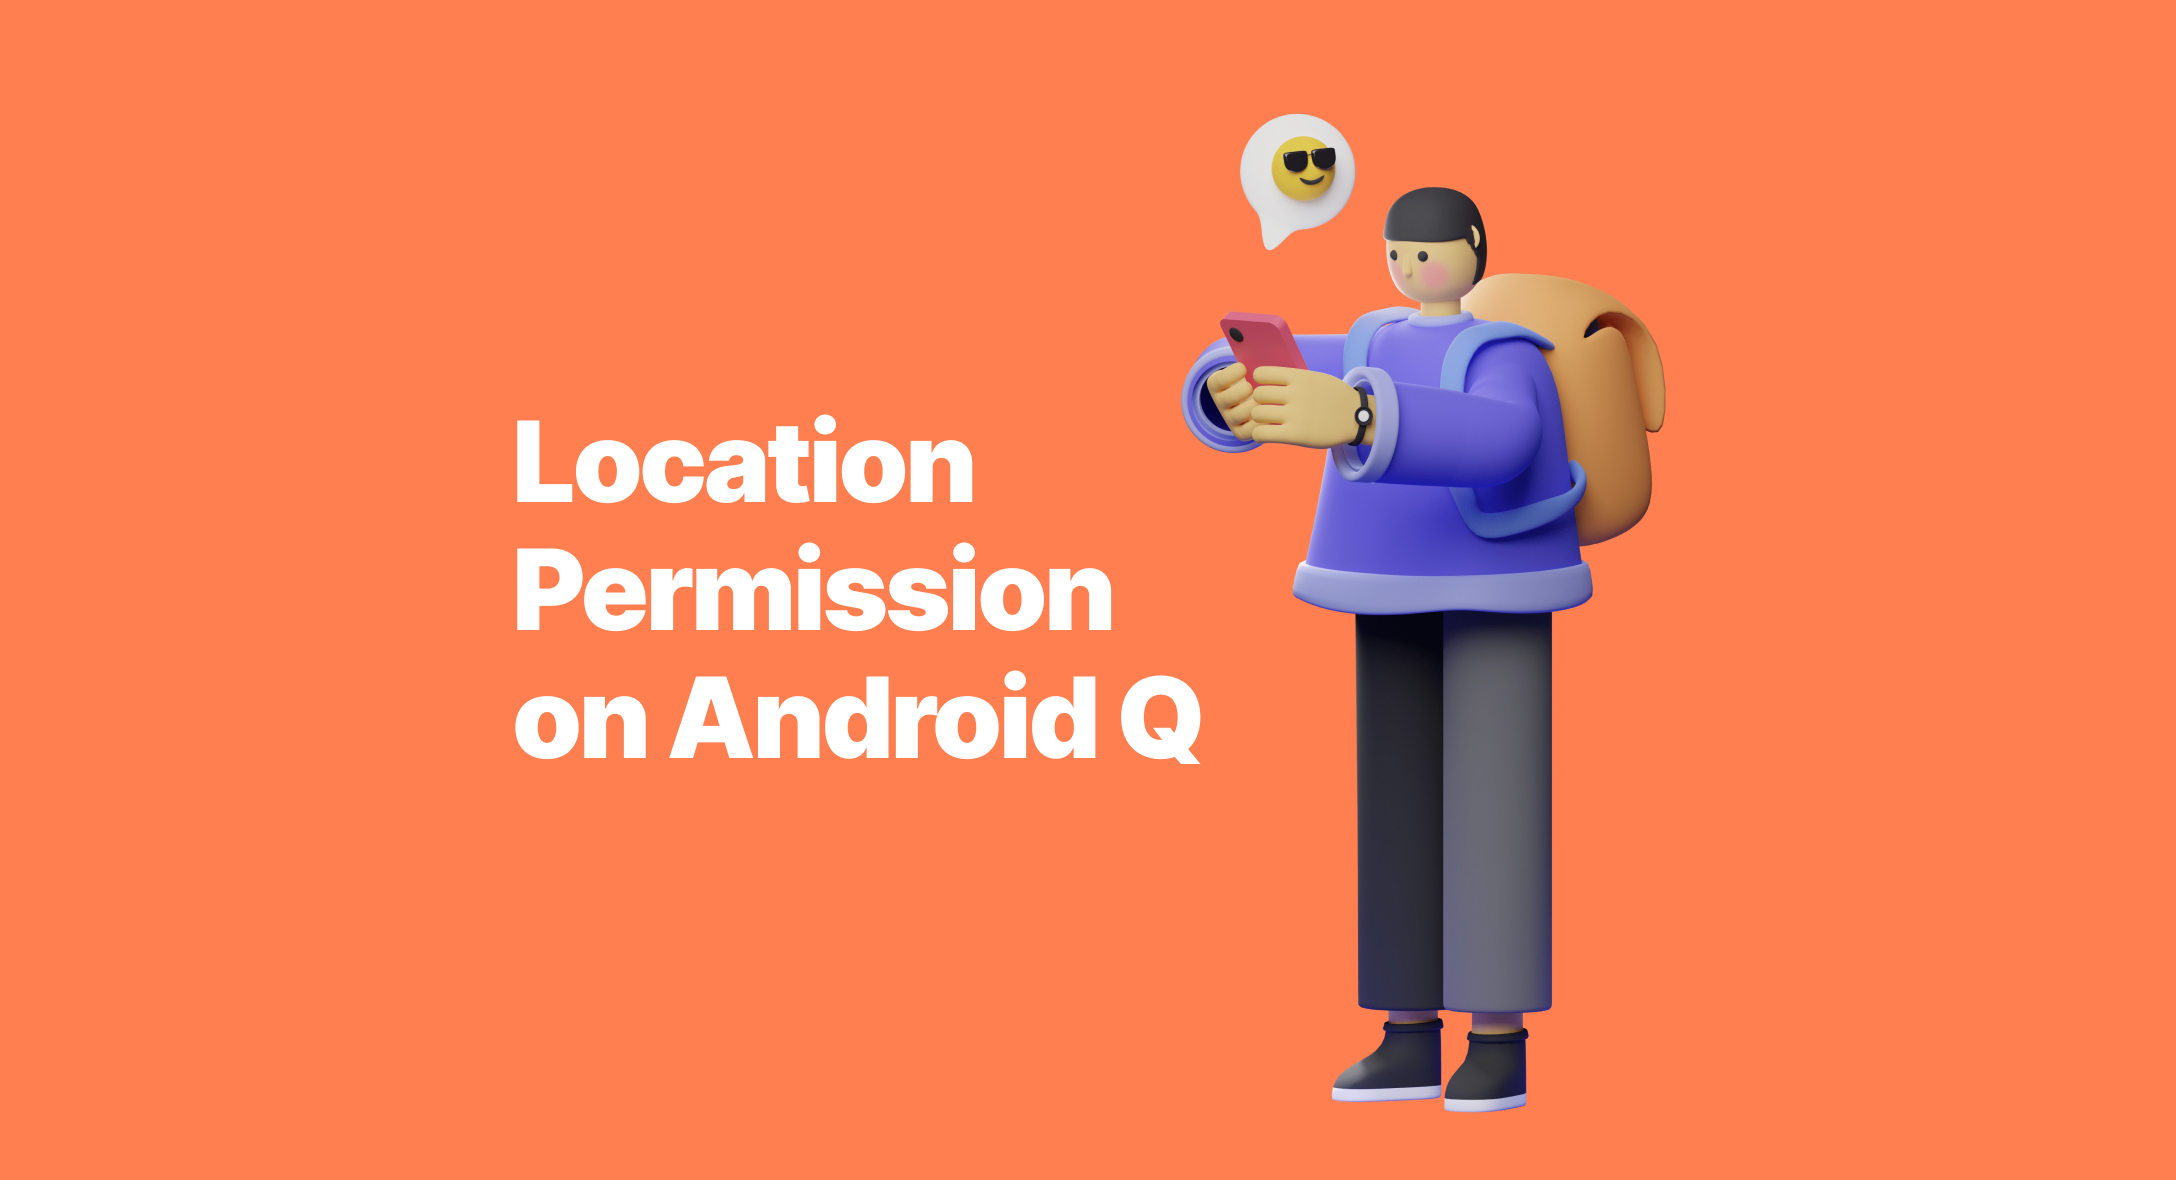 Get Location Permission on Android Q